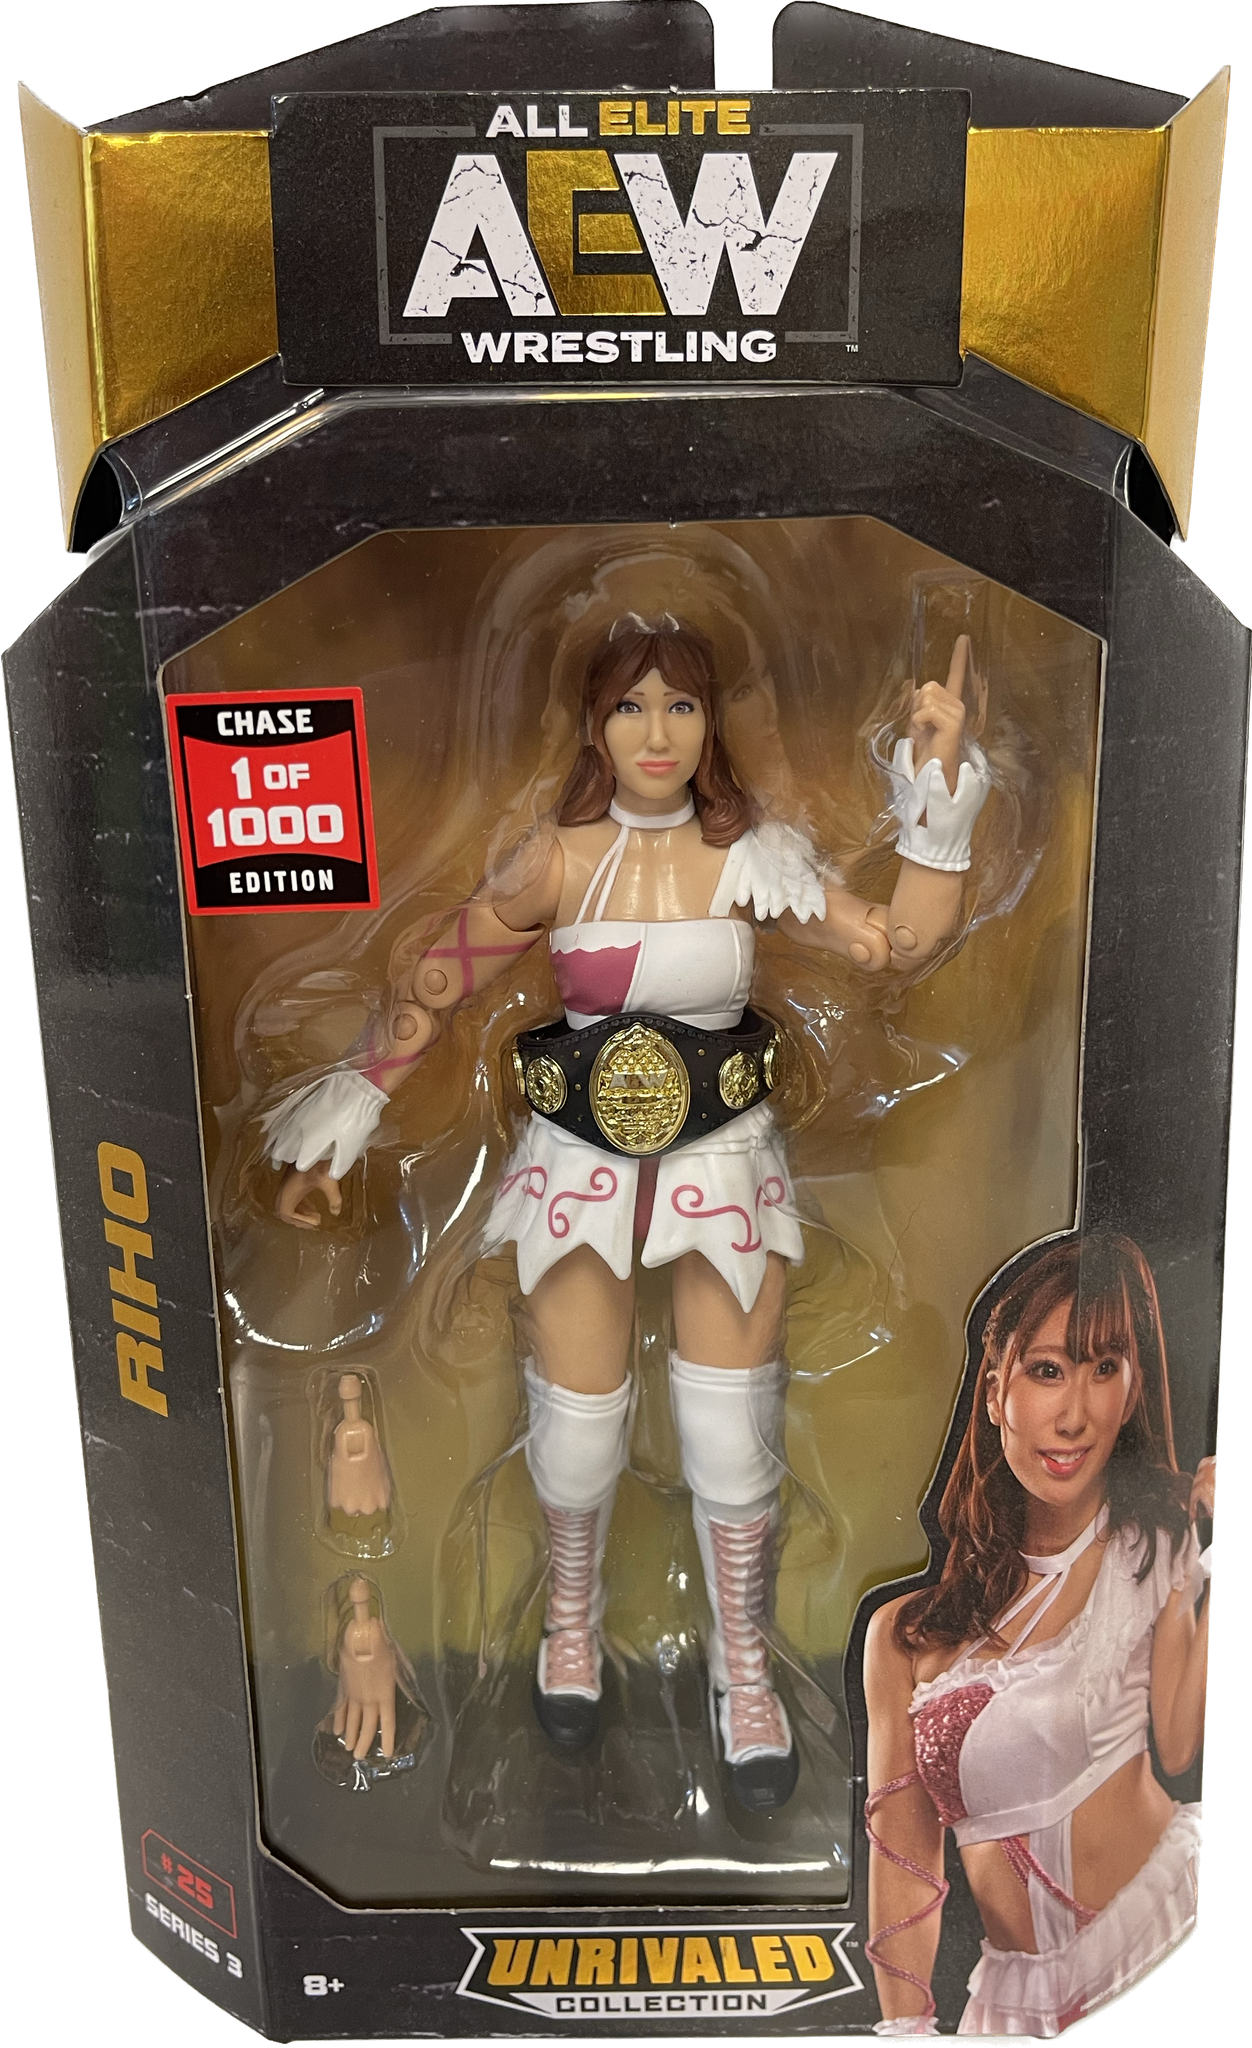 AEW Unrivaled Collection Series 3 #25 Riho Figure 1 Of 1000